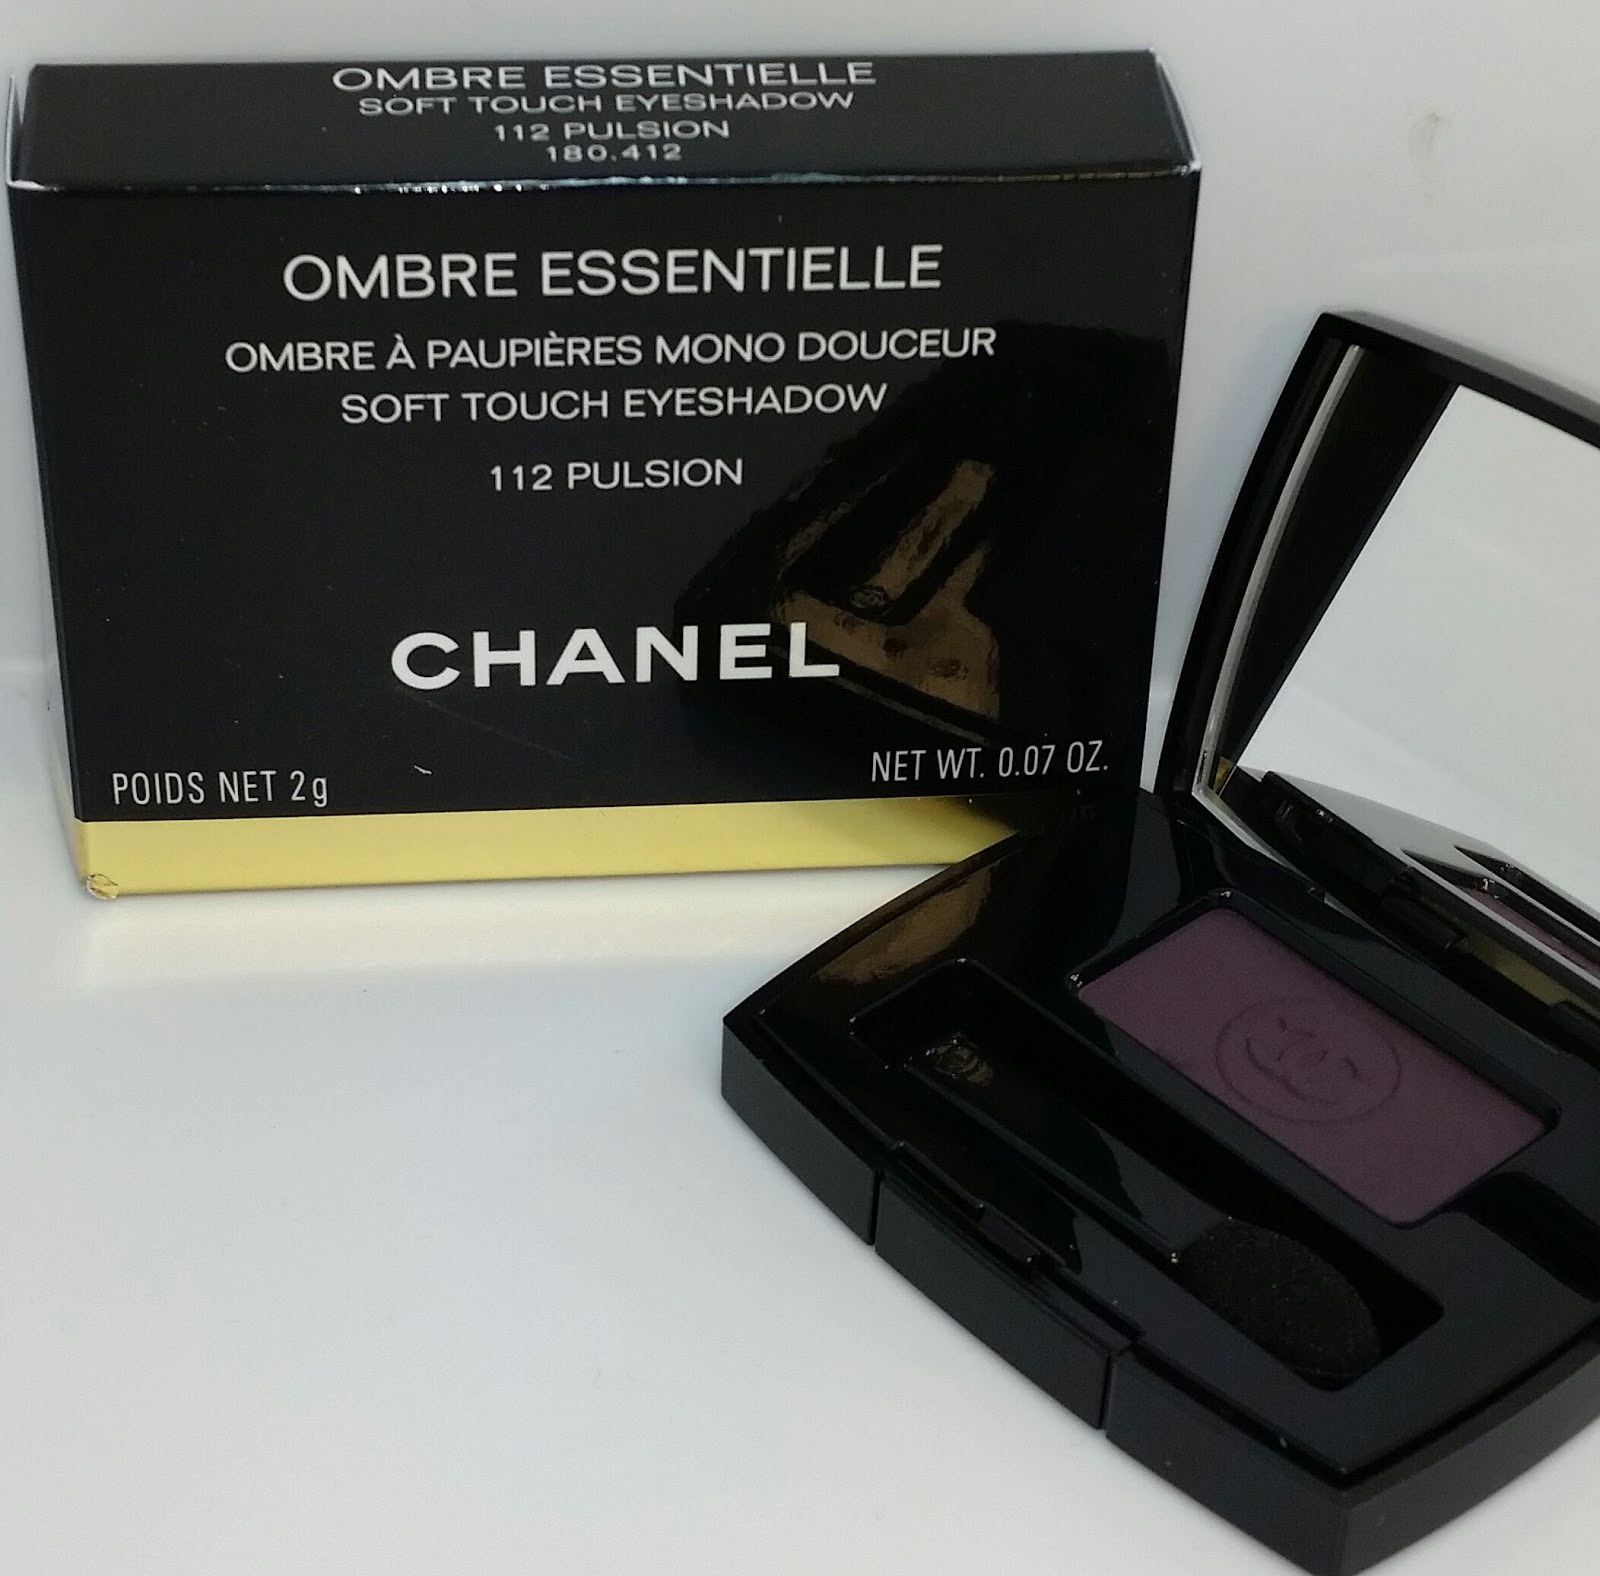 Jayded Dreaming Beauty Blog : 112 PULSION CHANEL OMBRE ESSENTIELLE SOFT  TOUCH EYESHADOW - SWATCHES AND REVIEW